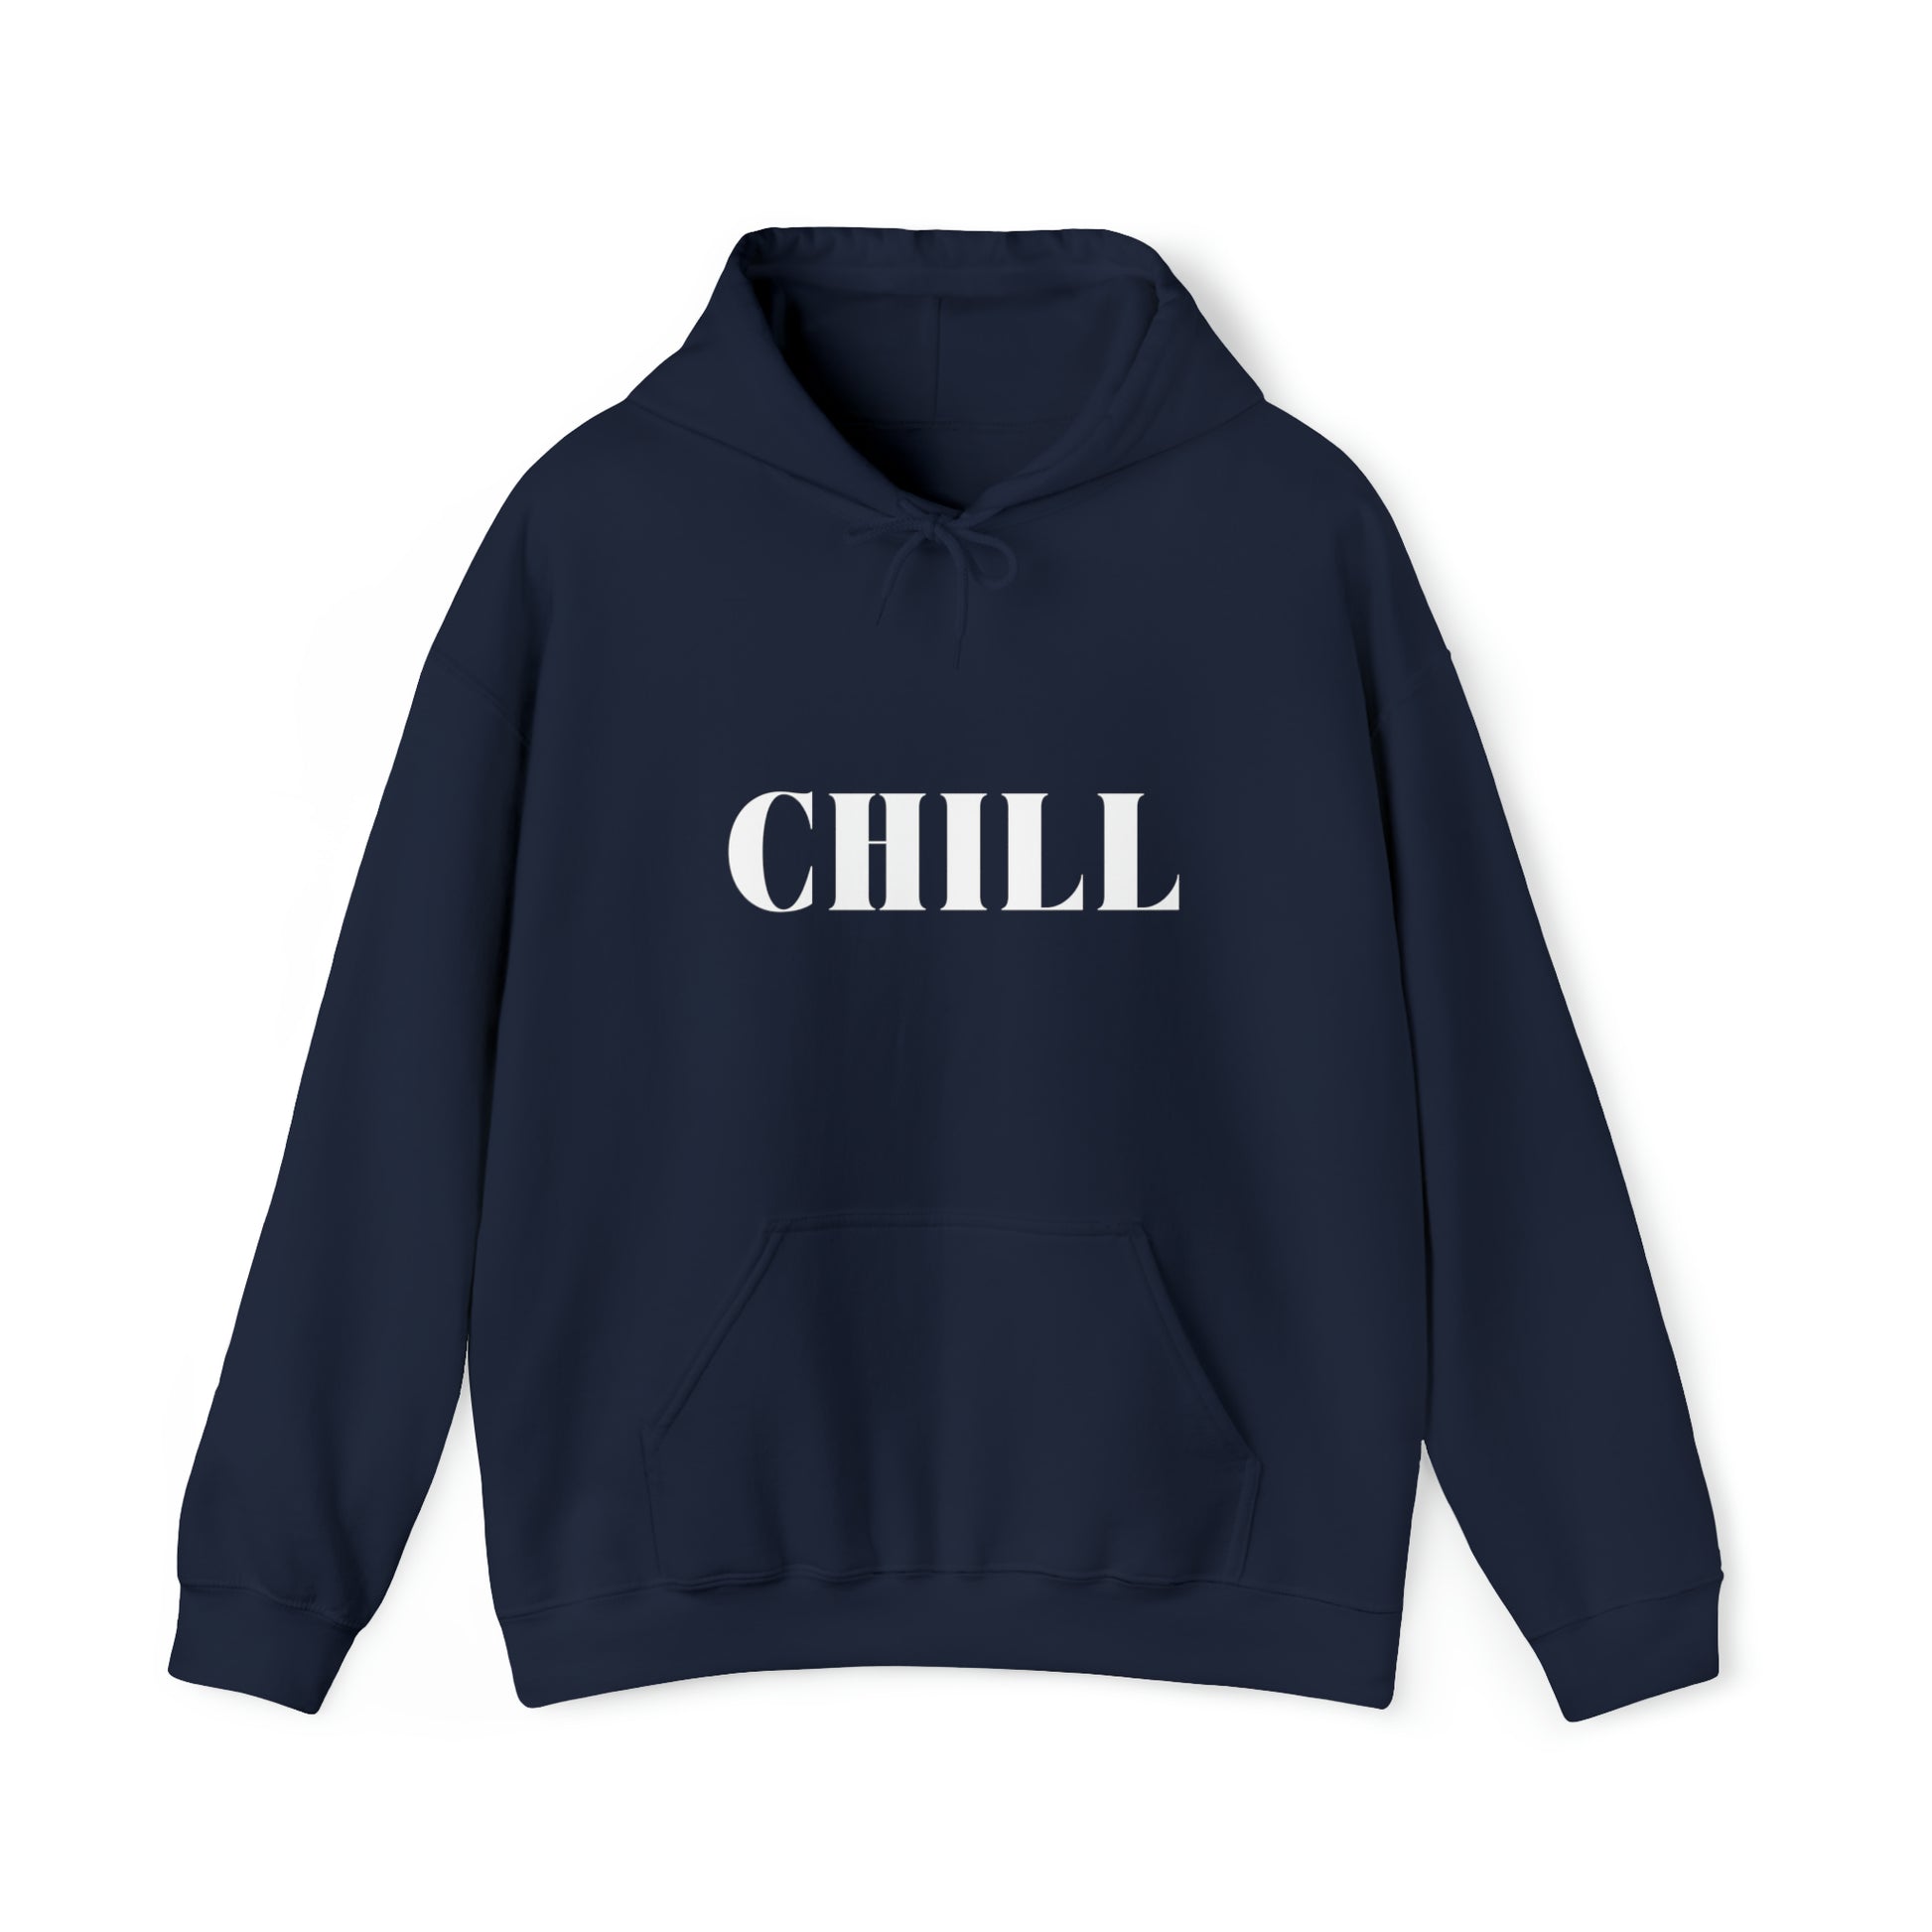 S Navy Chill Hoodie from HoodySZN.com